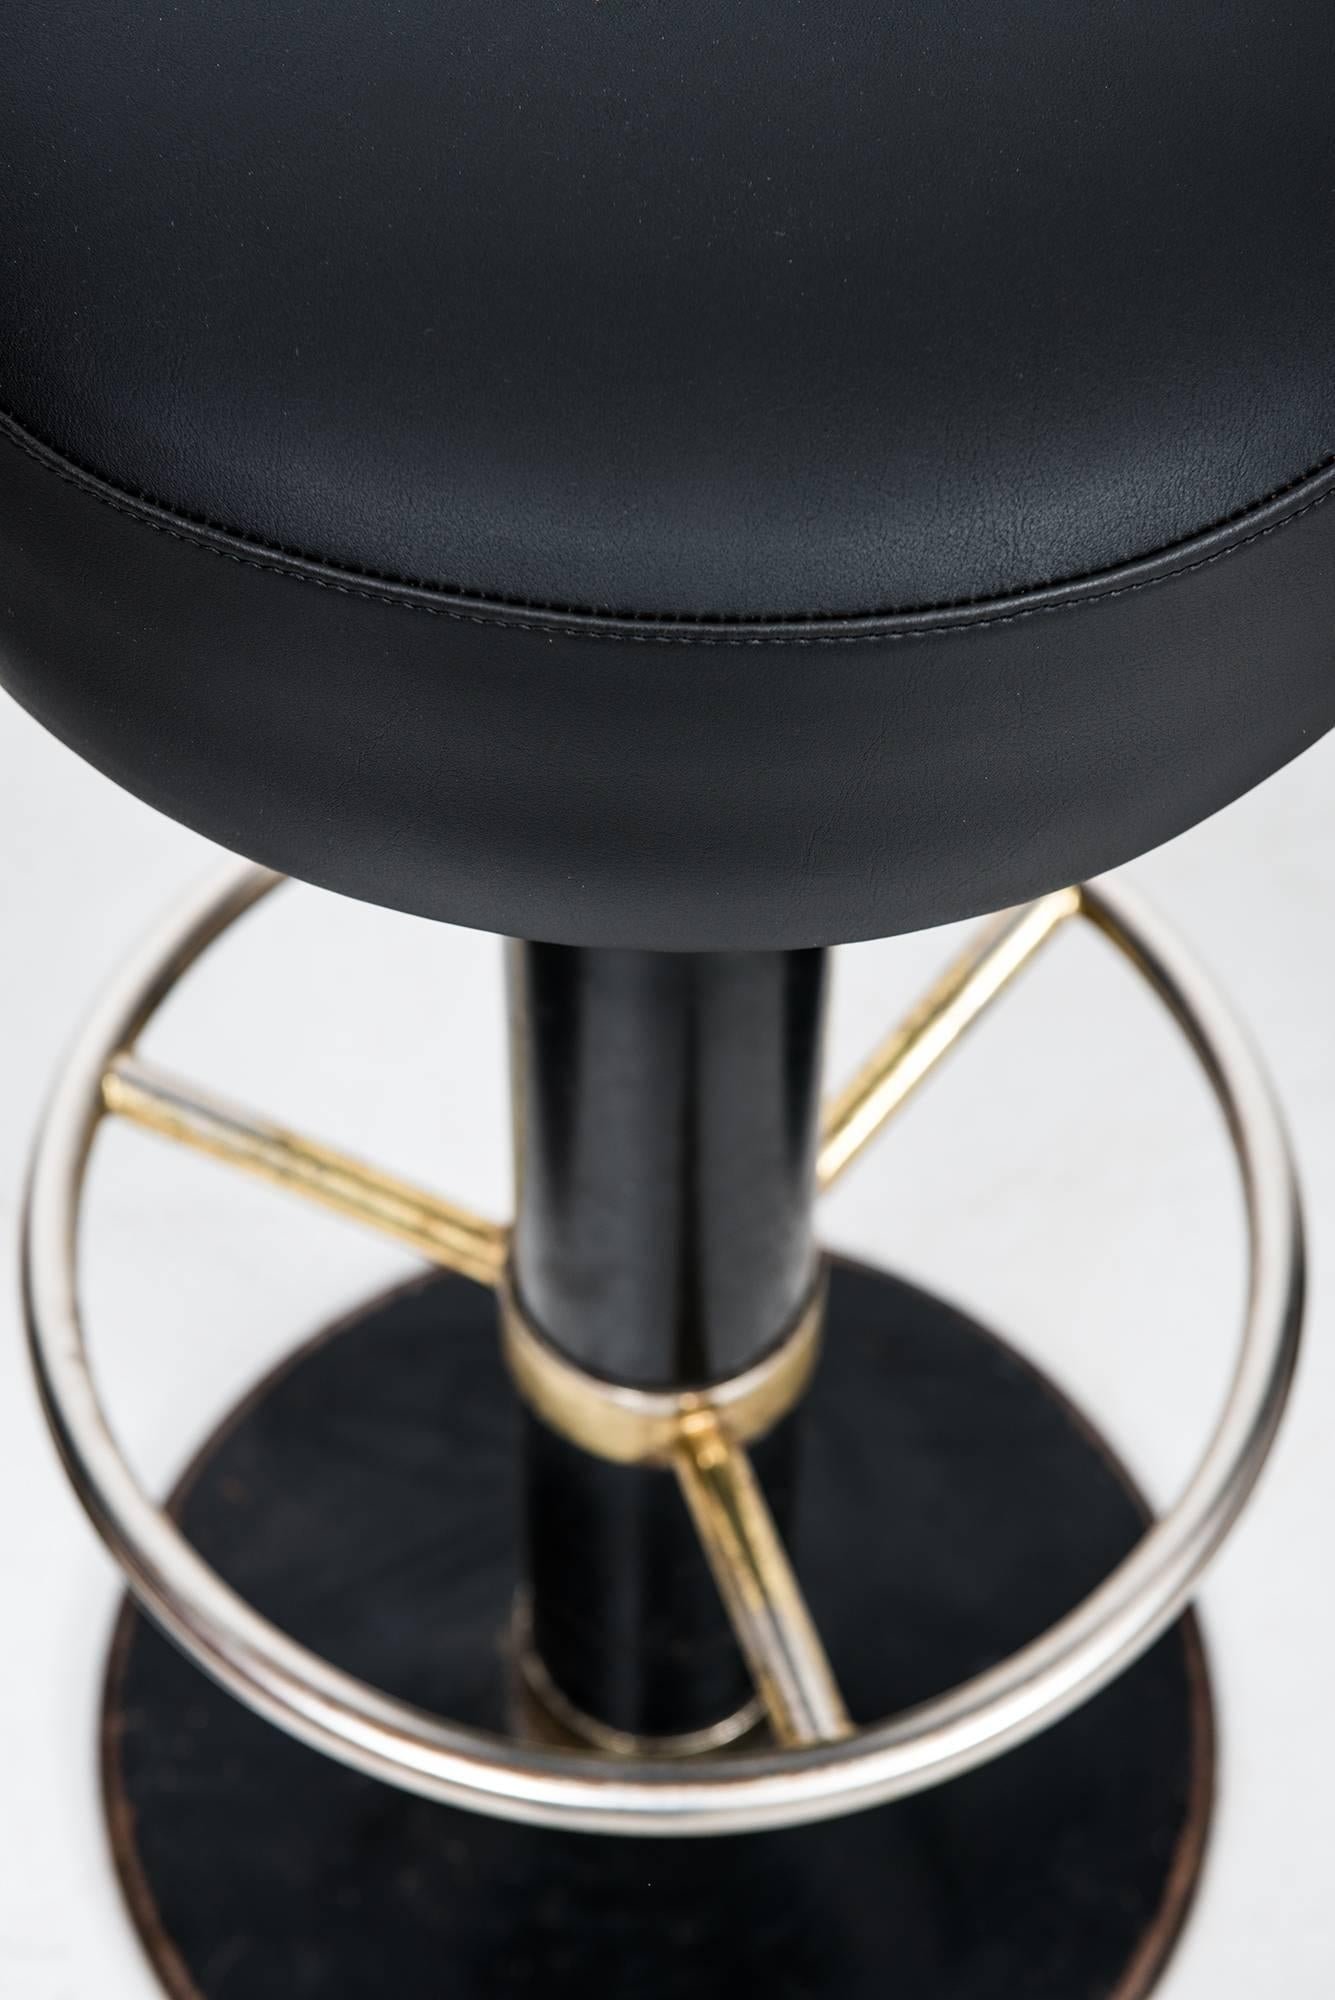 Scandinavian Modern Bar Stool Designed by Börje Johansson and Pproduced by Johansson Design in Swede